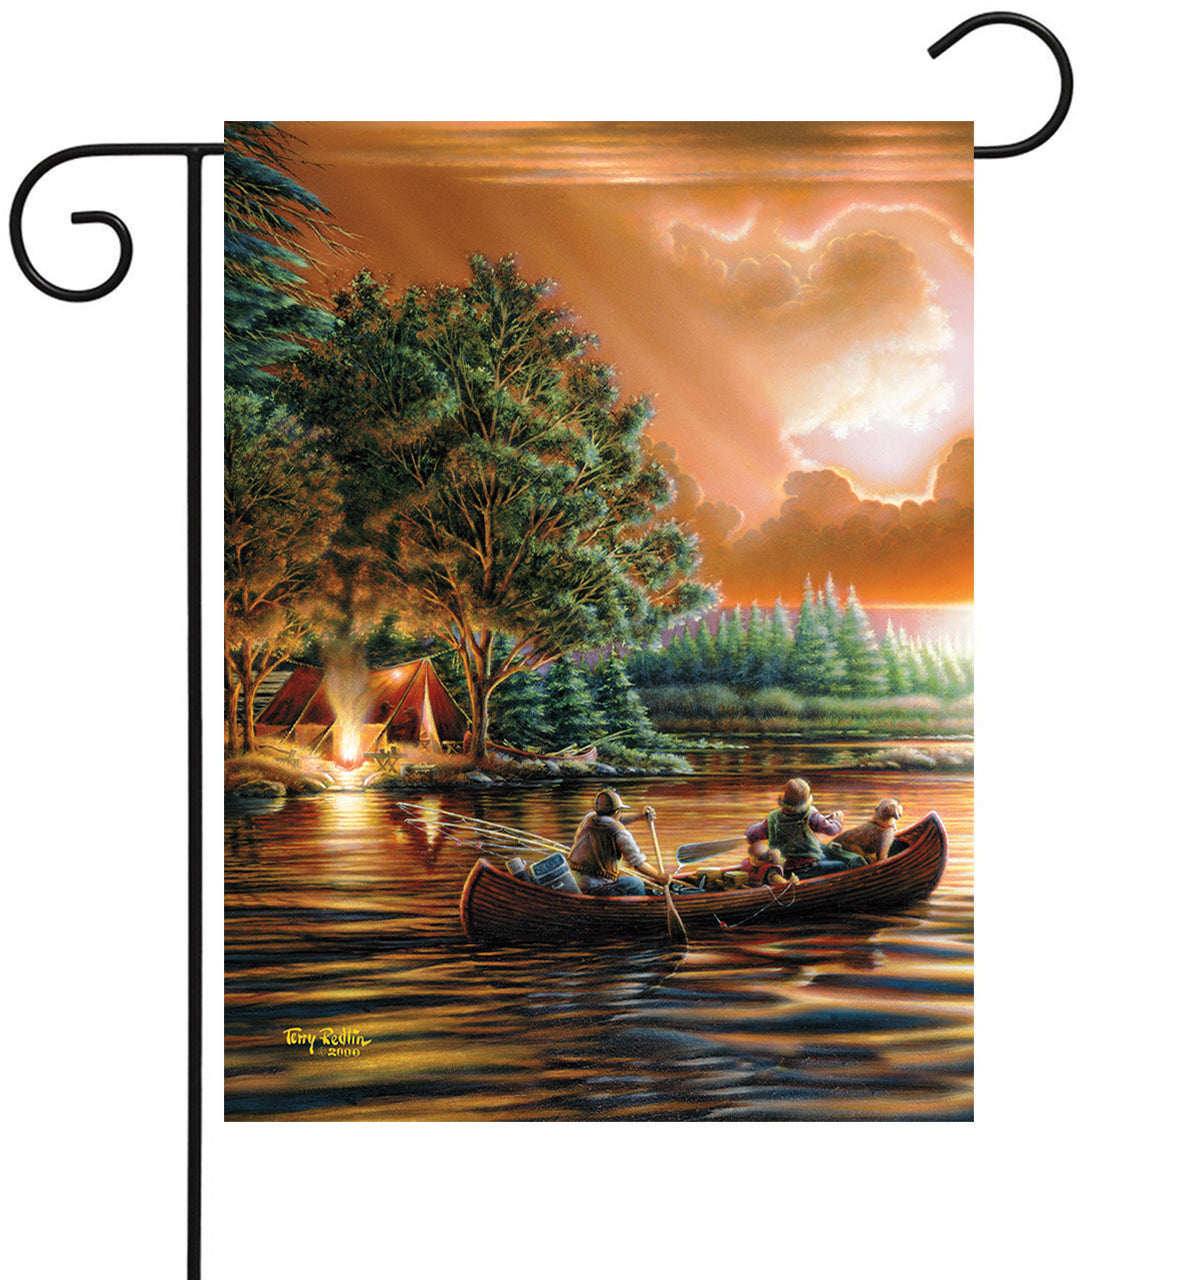 Evening Rendezvous - Small Garden Flag by Lang